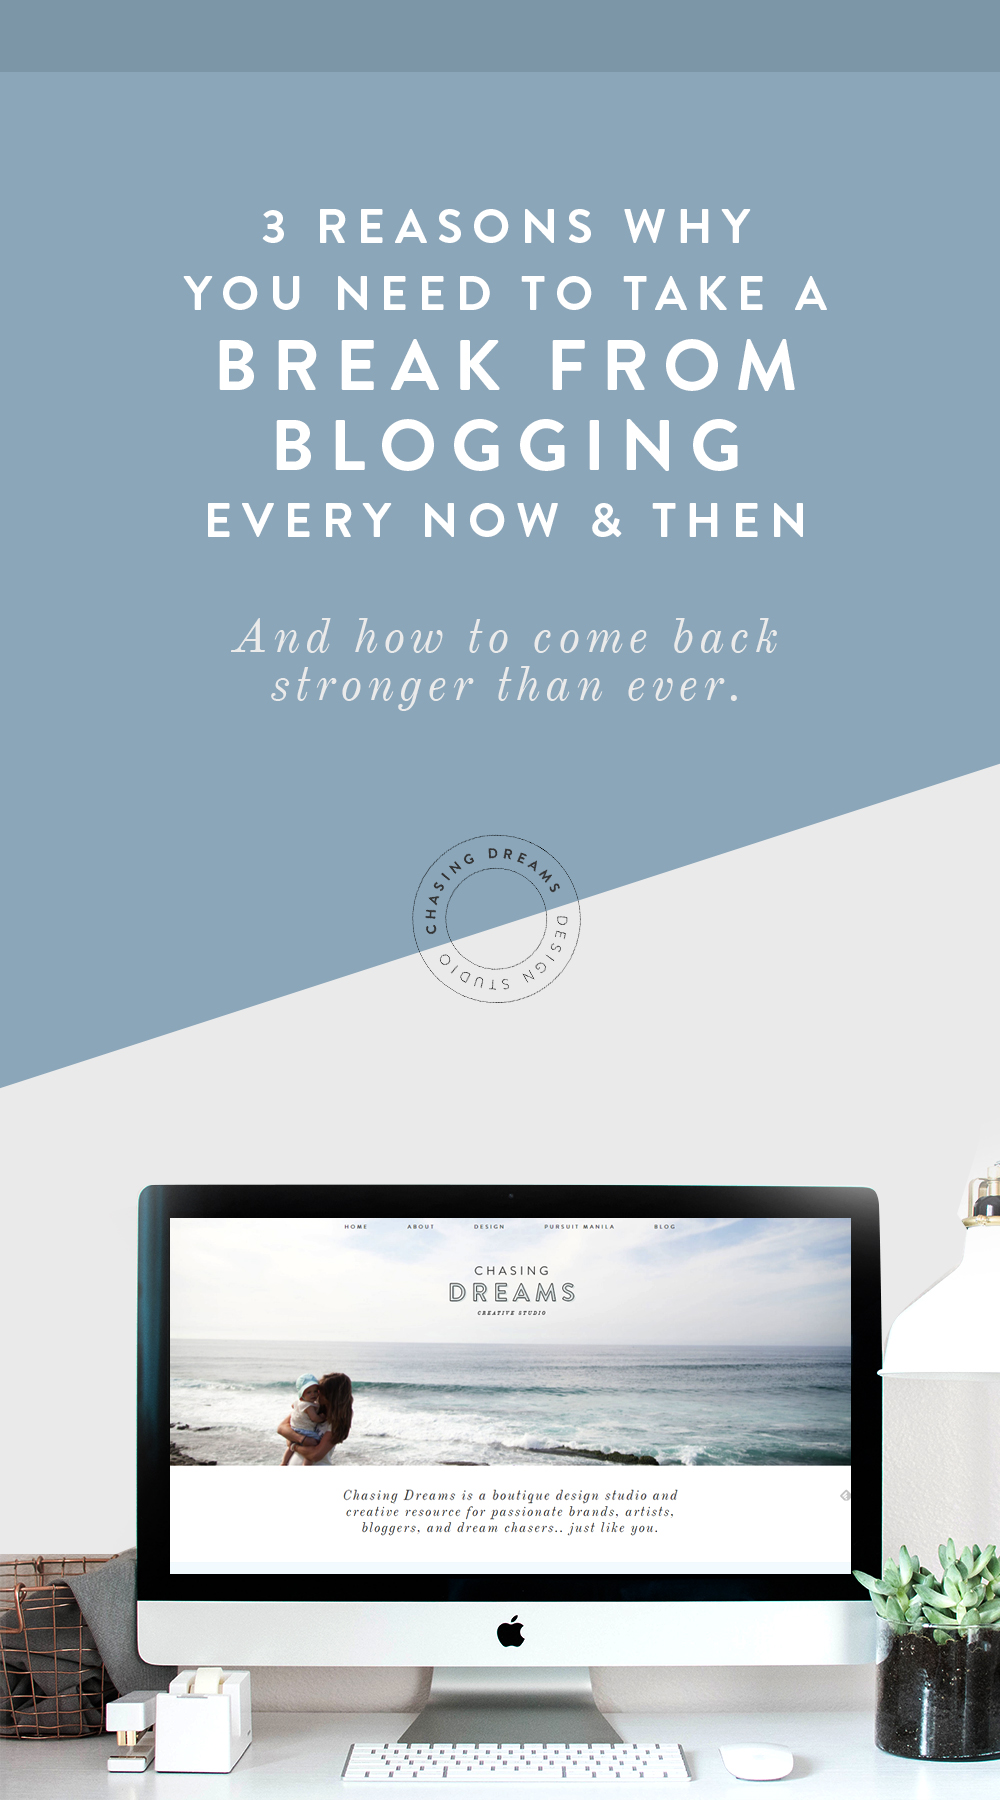 Blogging burnout is real, and when it happens, learn how to take a break. Here are 3 reasons why you need to take a blogging break, and how to come back stronger than ever.